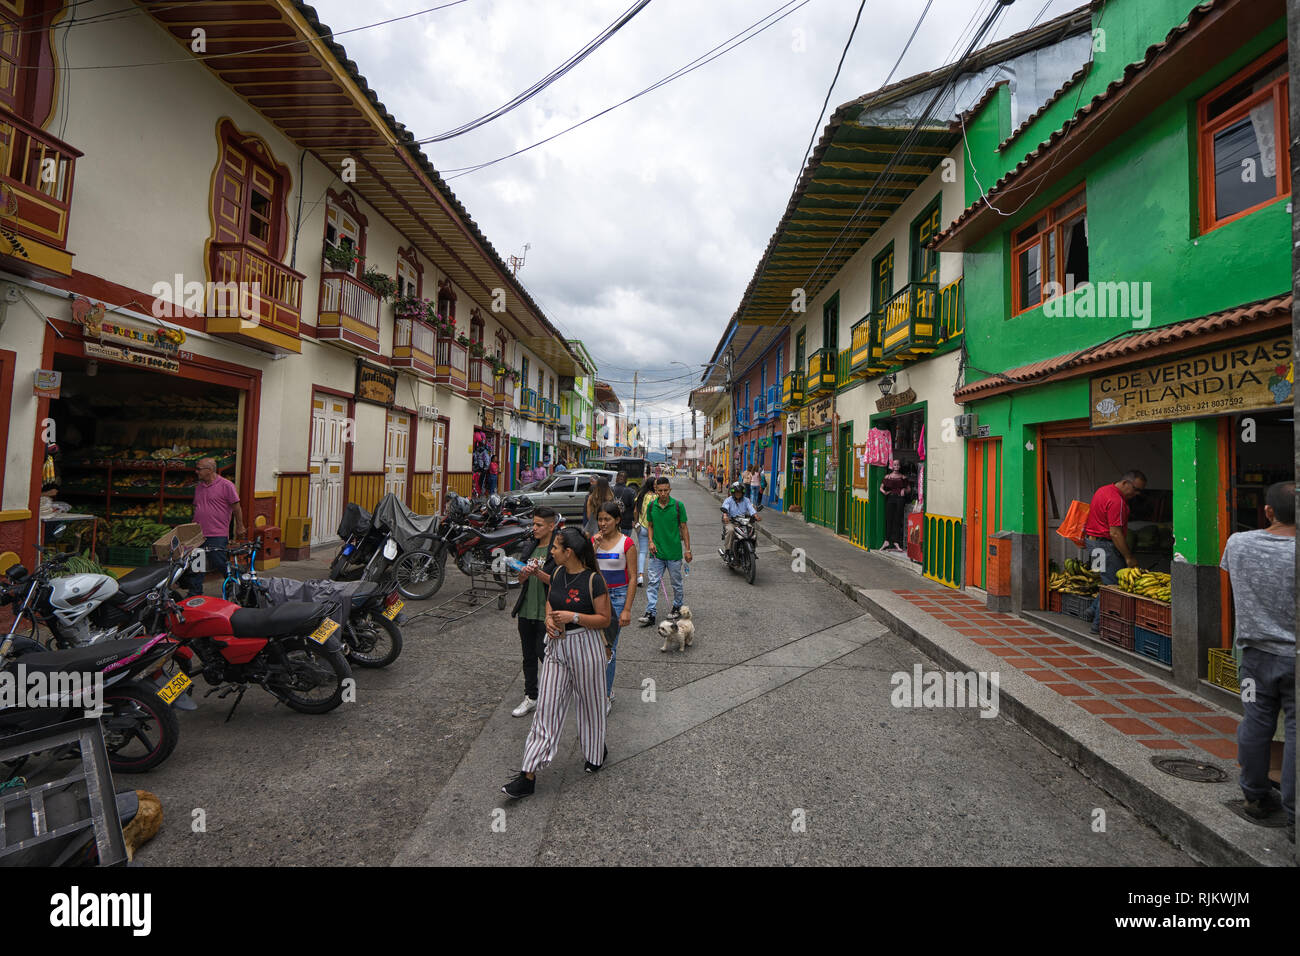 Filandia, Colombia- September 9, 2018: tourists walking on the street flanked by colourful houses in the center of the town Stock Photo